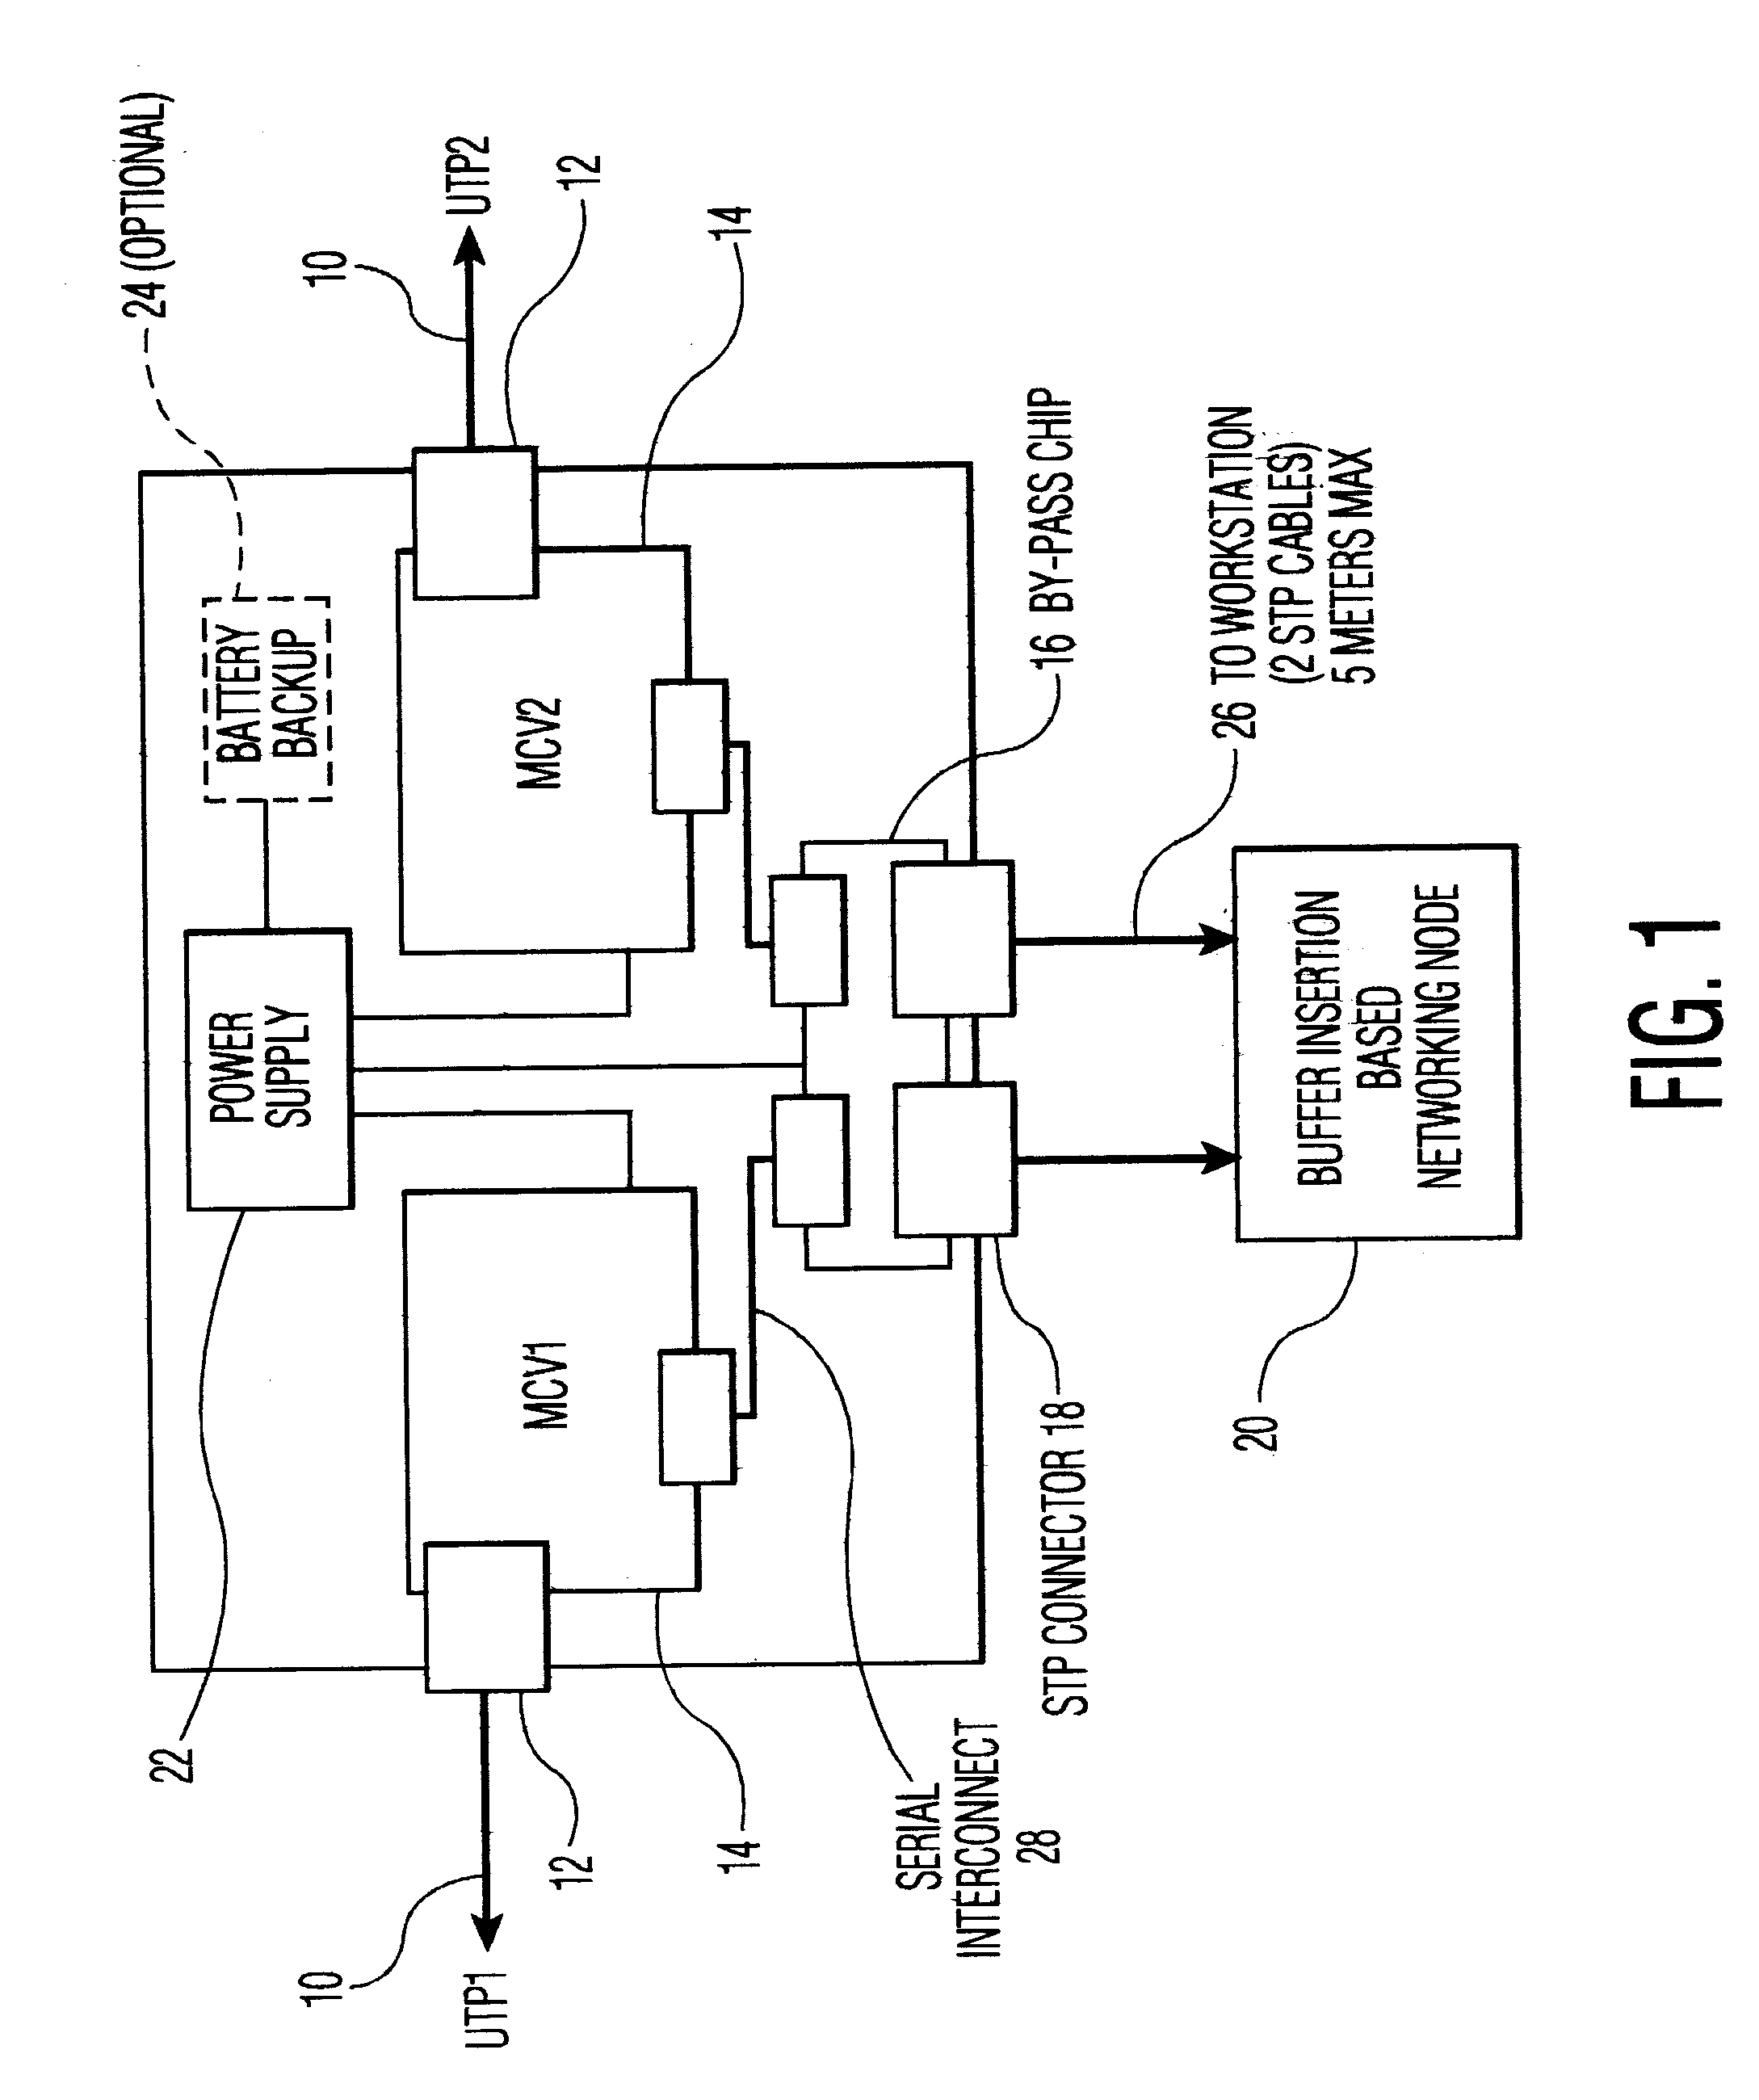 Computer and peripheral networking device permitting the practical use of buffer insertion-based networks while communicating over unshielded twisted pair conductive media